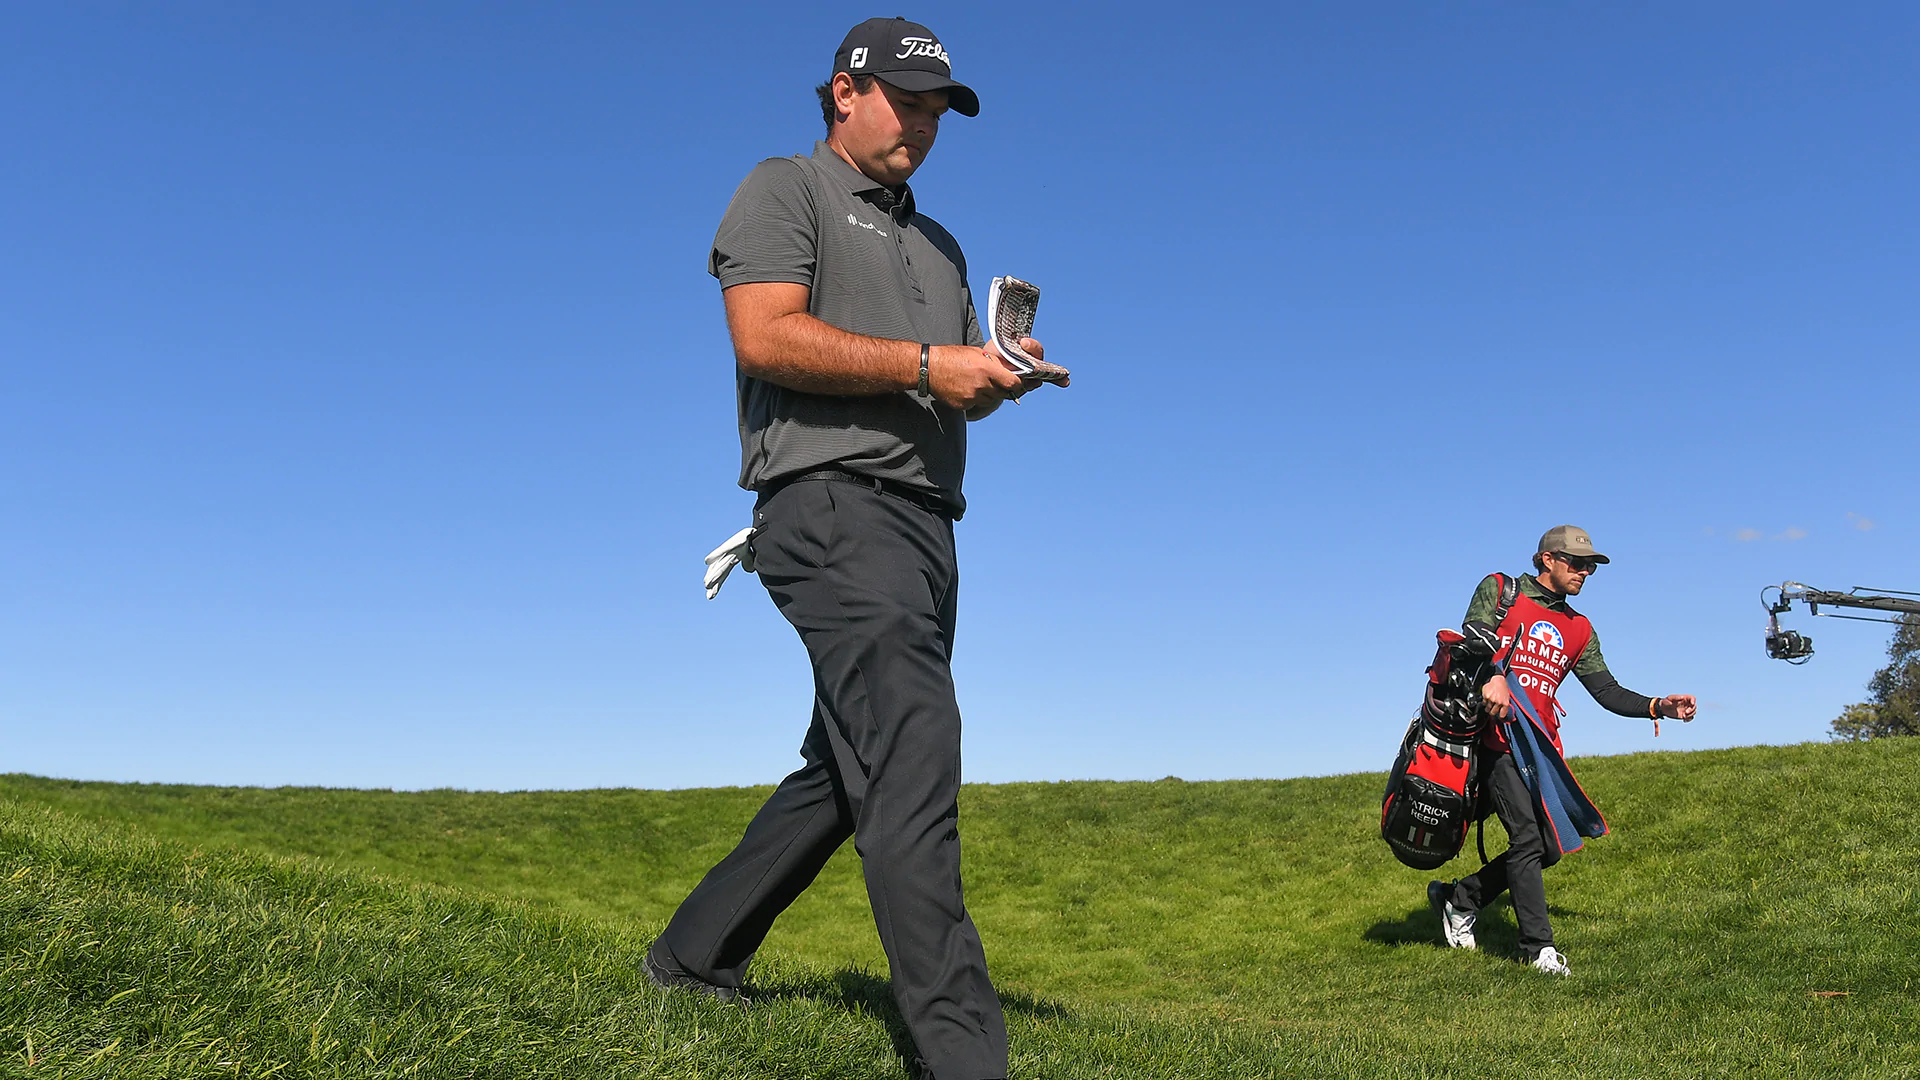 How it happened: Patrick Reed’s controversial drop at Torrey Pines